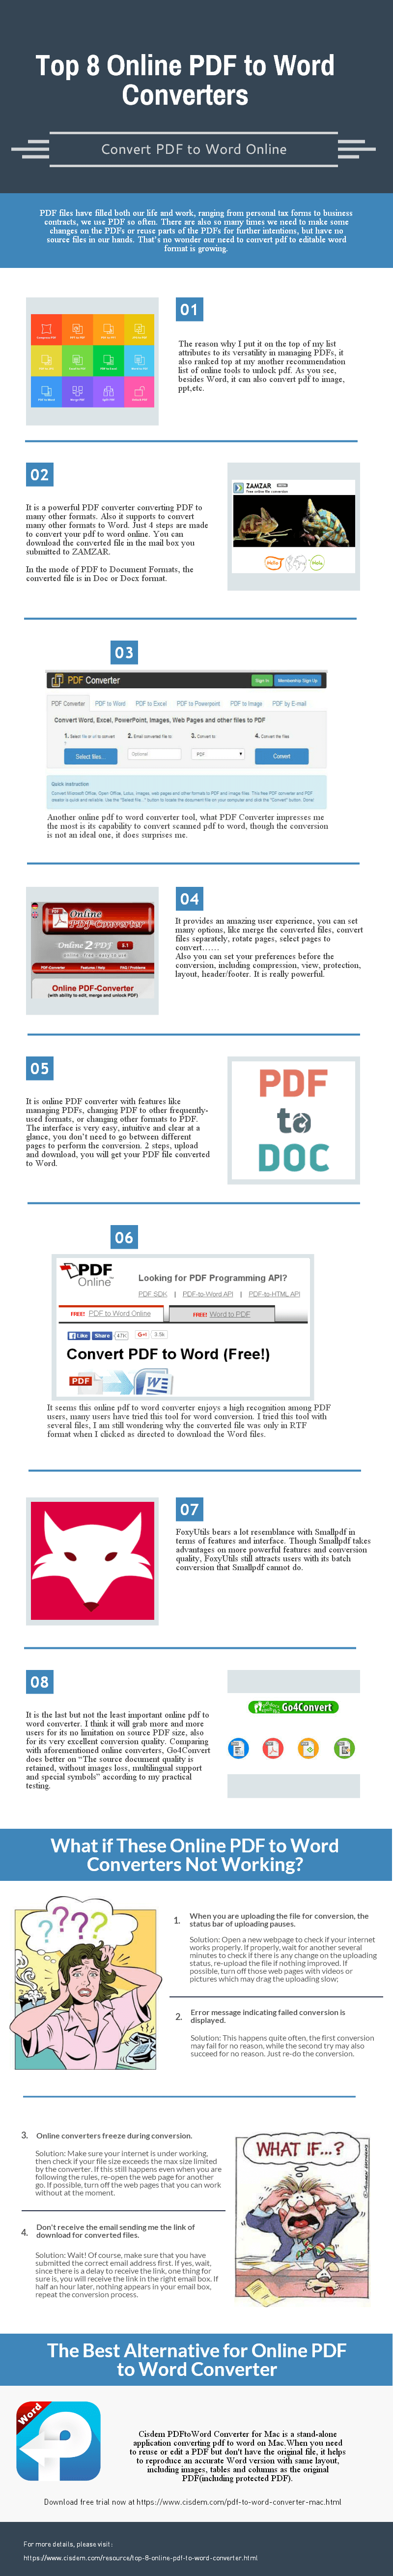 top-8-online-pdf-to-word-converters-infographic-plaza